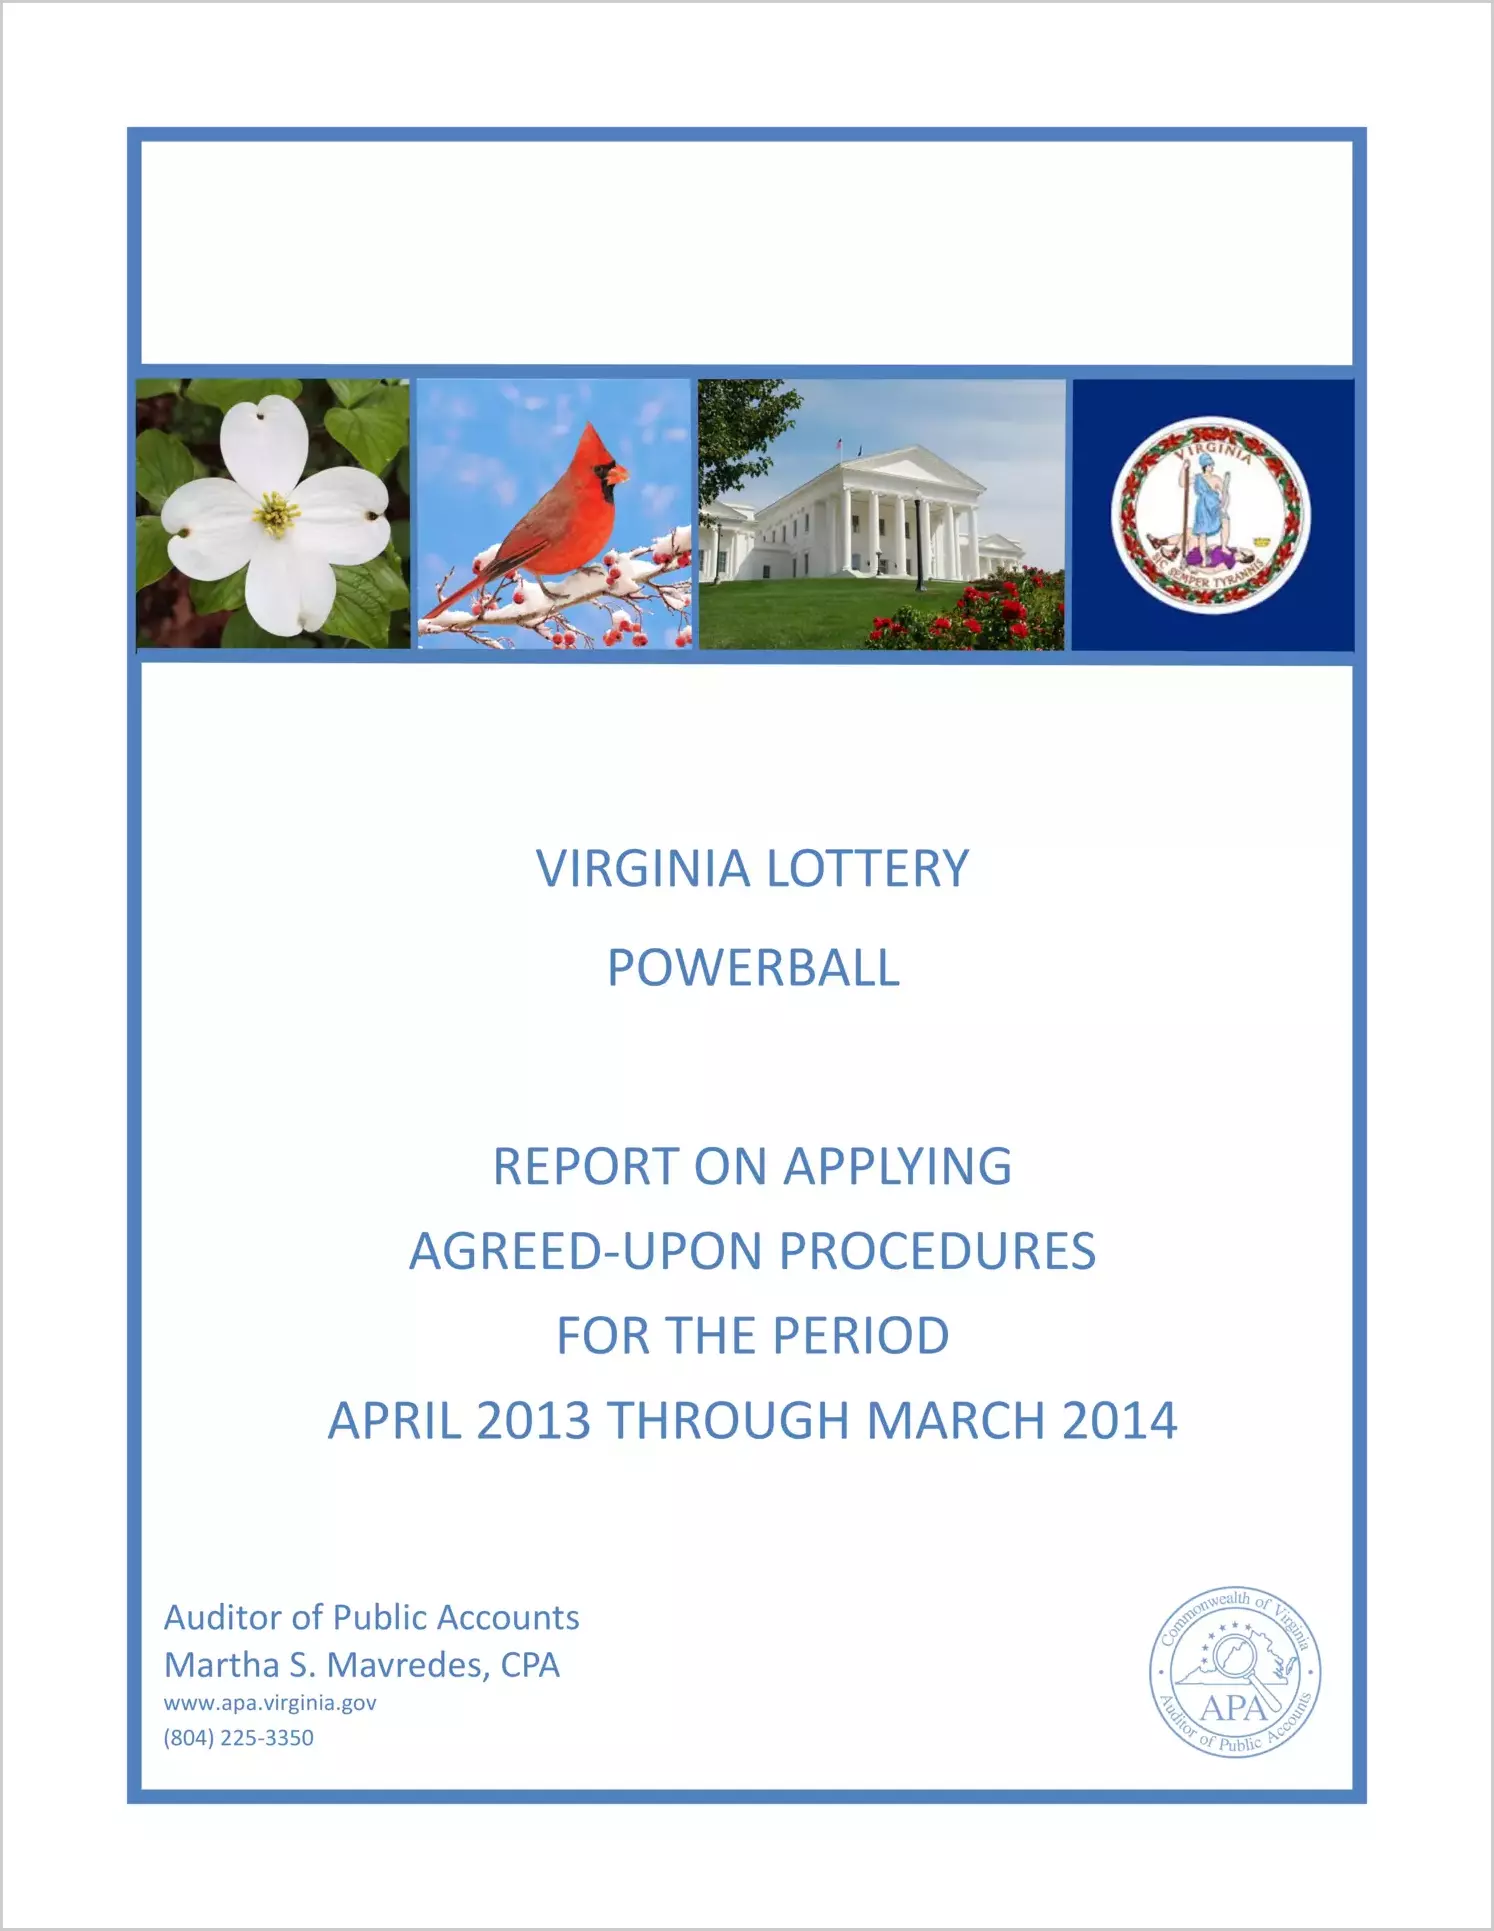 VA Lottery Powerball report on Applying Agreed-Upon Procedures for the period April, 2013 through March, 2014